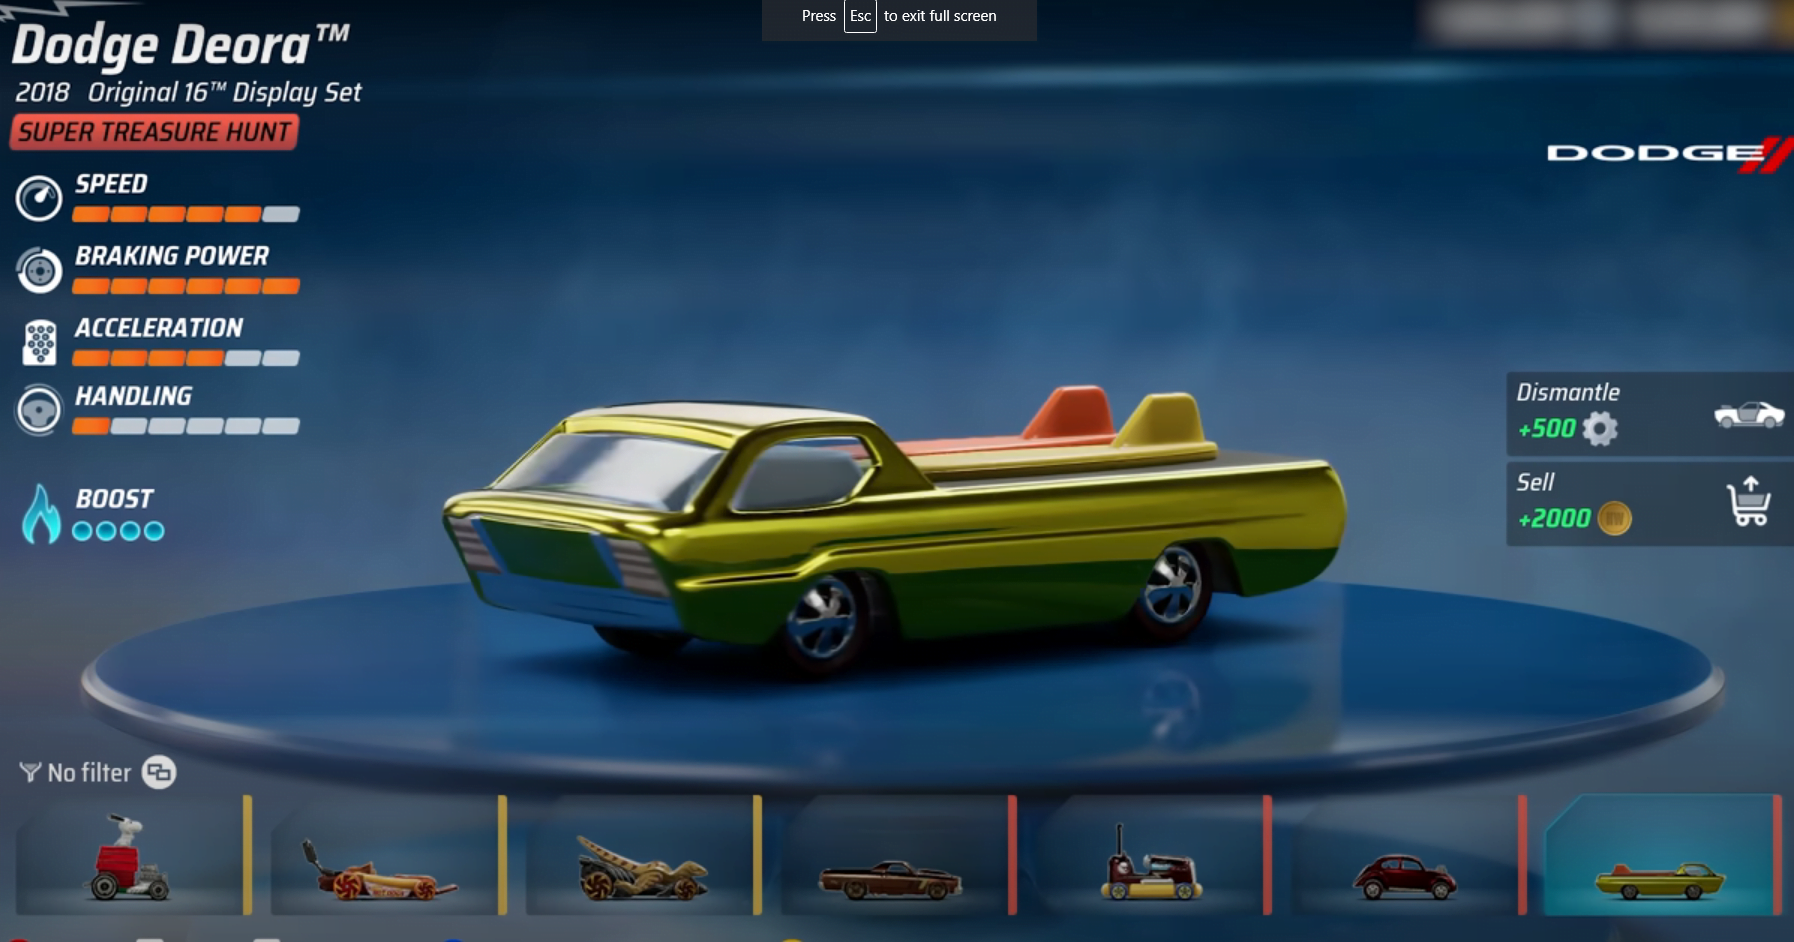 How To Obtain the Deora